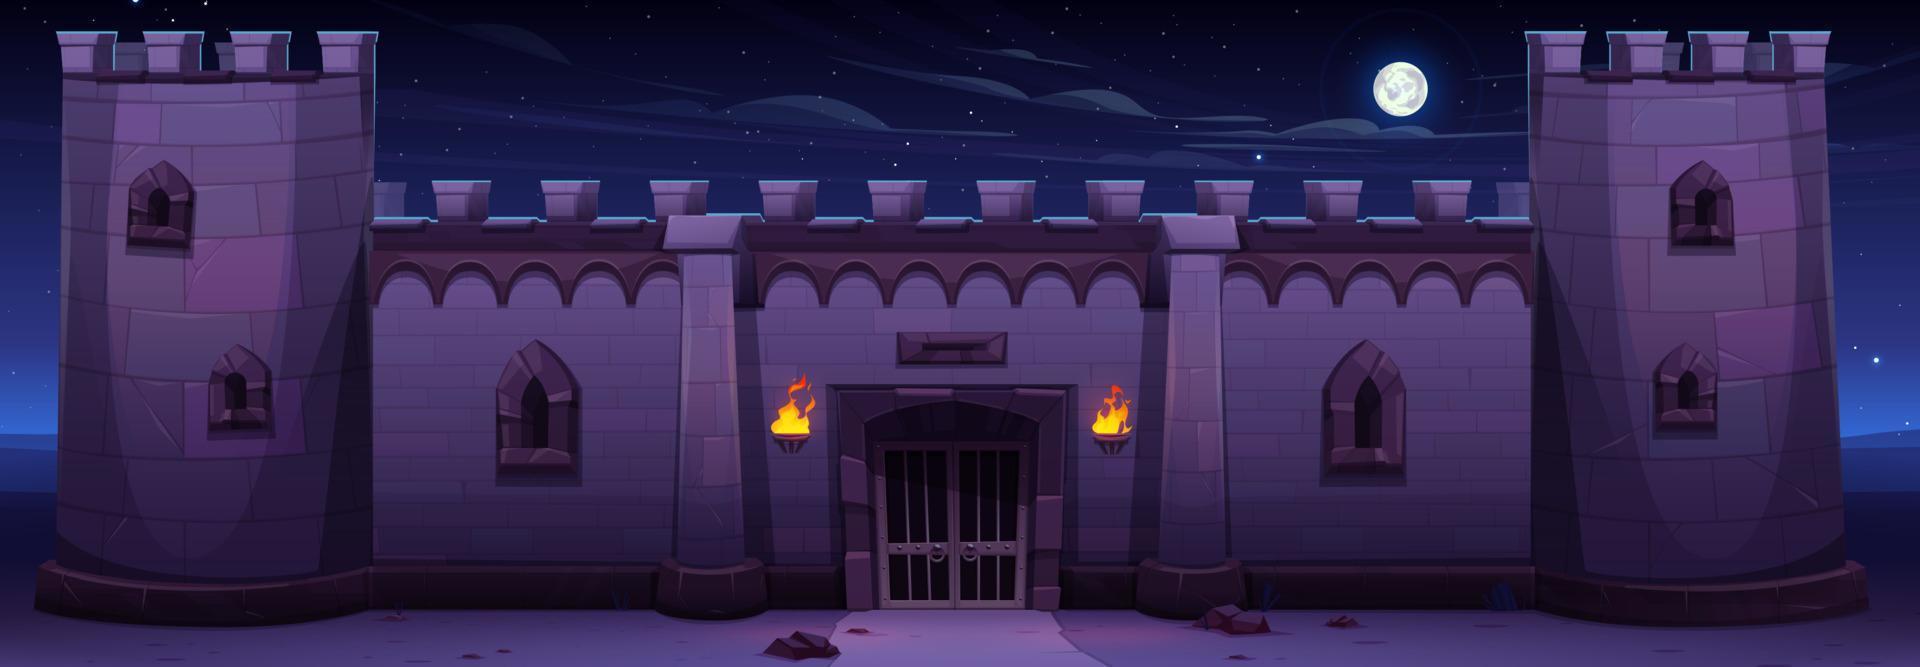 Wall of medieval stone castle at night vector